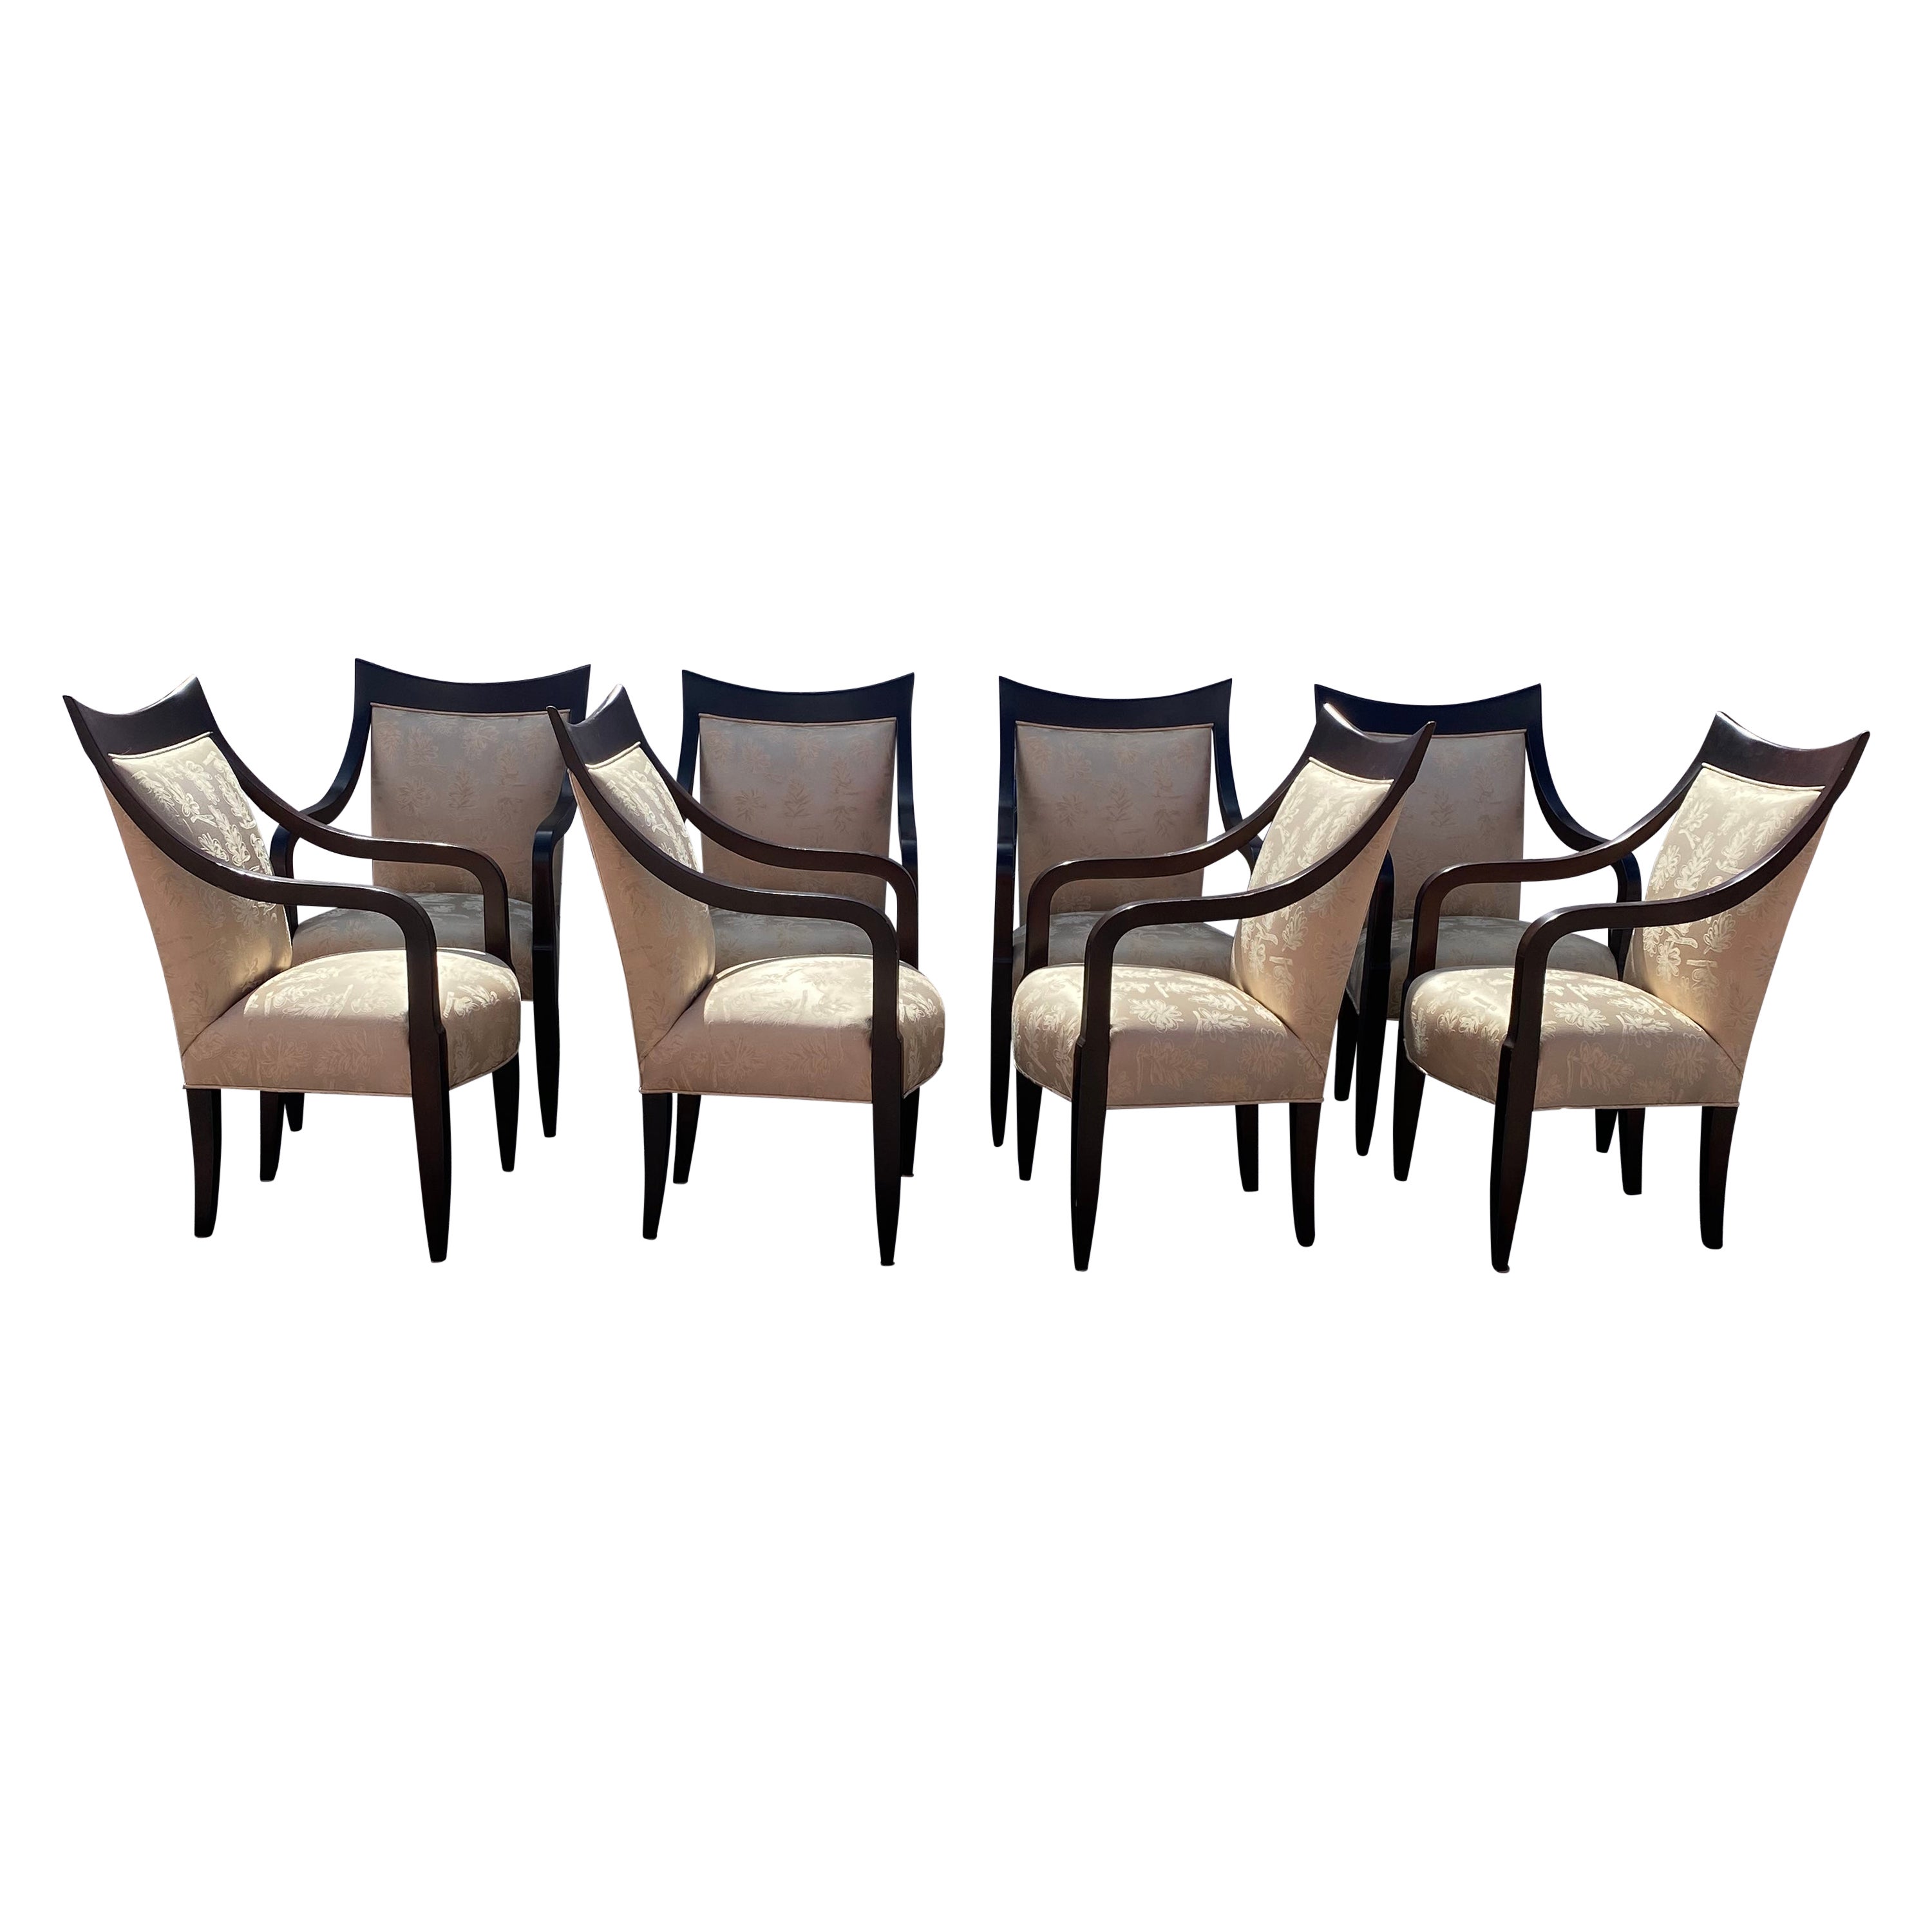 Donghia Silk Sculptural Wood Dining Chairs, Set of 8 For Sale